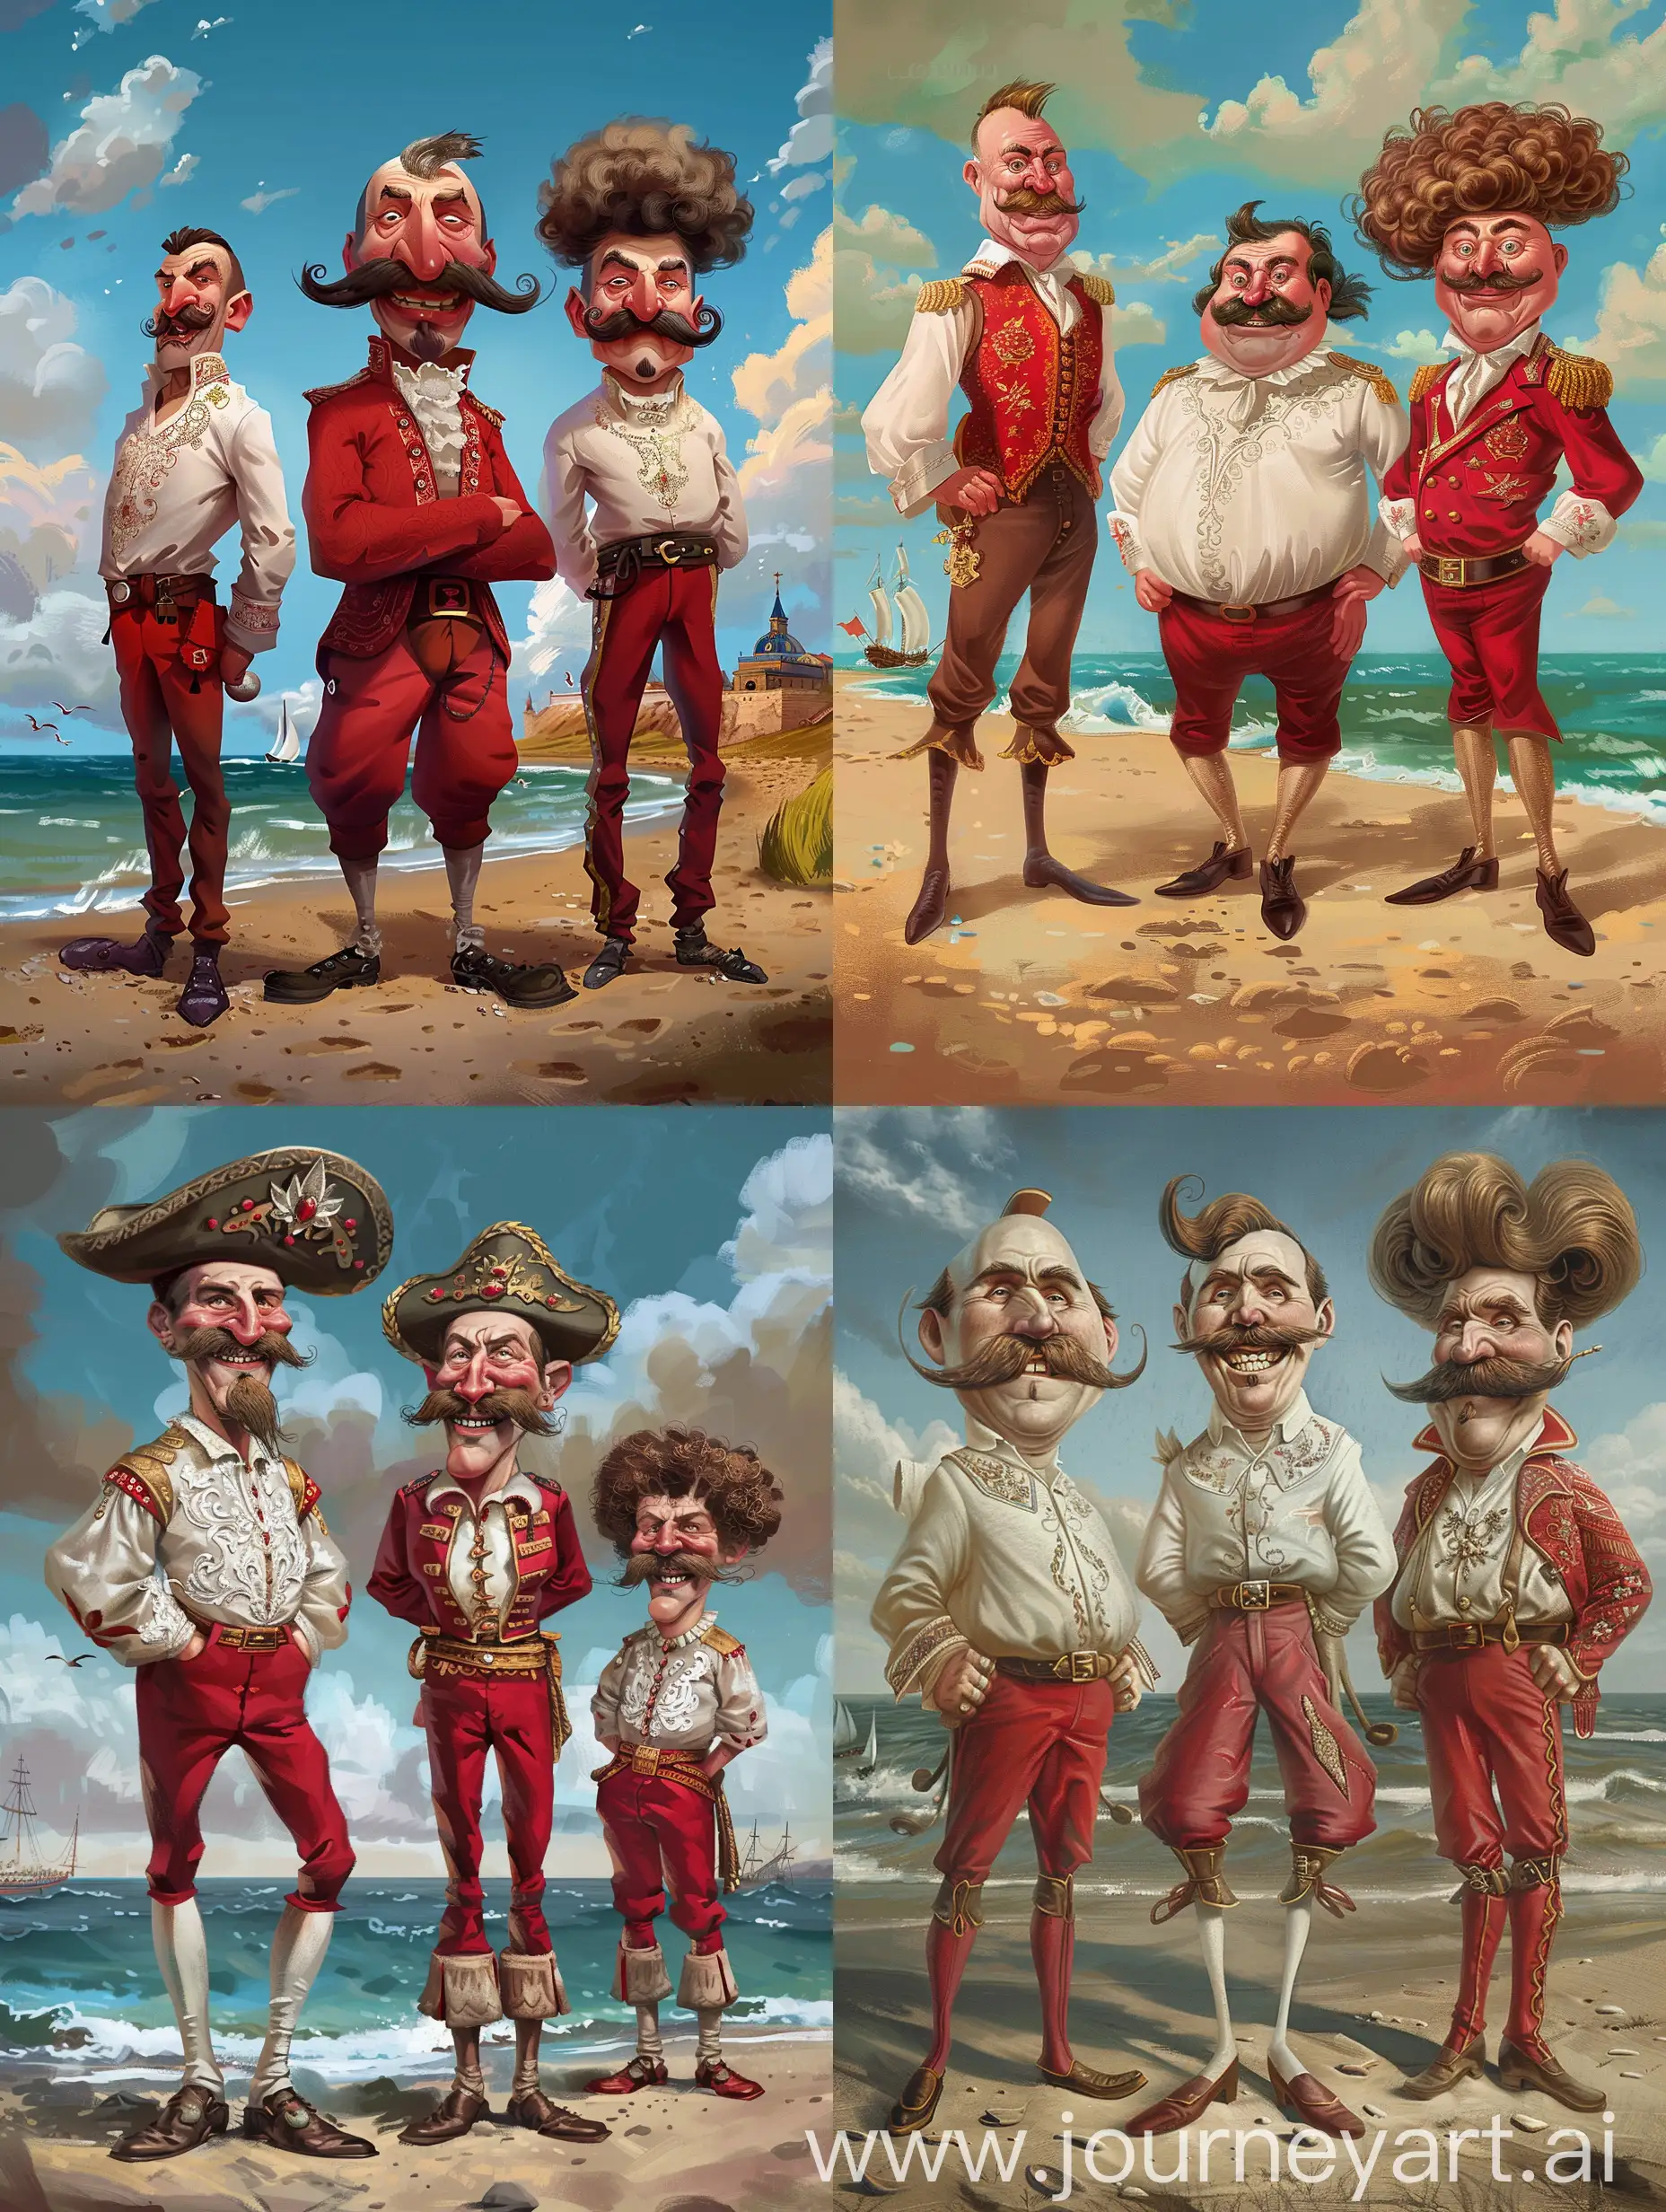 2D, shore, 3 Cossacks, the first Cossack is tall and with broad shoulders and strong arms and short hair, the second Cossack is tall and thin, he has a large mustache and is dressed in a red suit and a forelock sticks out from under his oblong hat, 3 Cossack is very short he has a huge curly mustache and the same forelock, the Cossacks are dressed in white embroidered shirt and red trousers and oblong shoes, they are smiling
